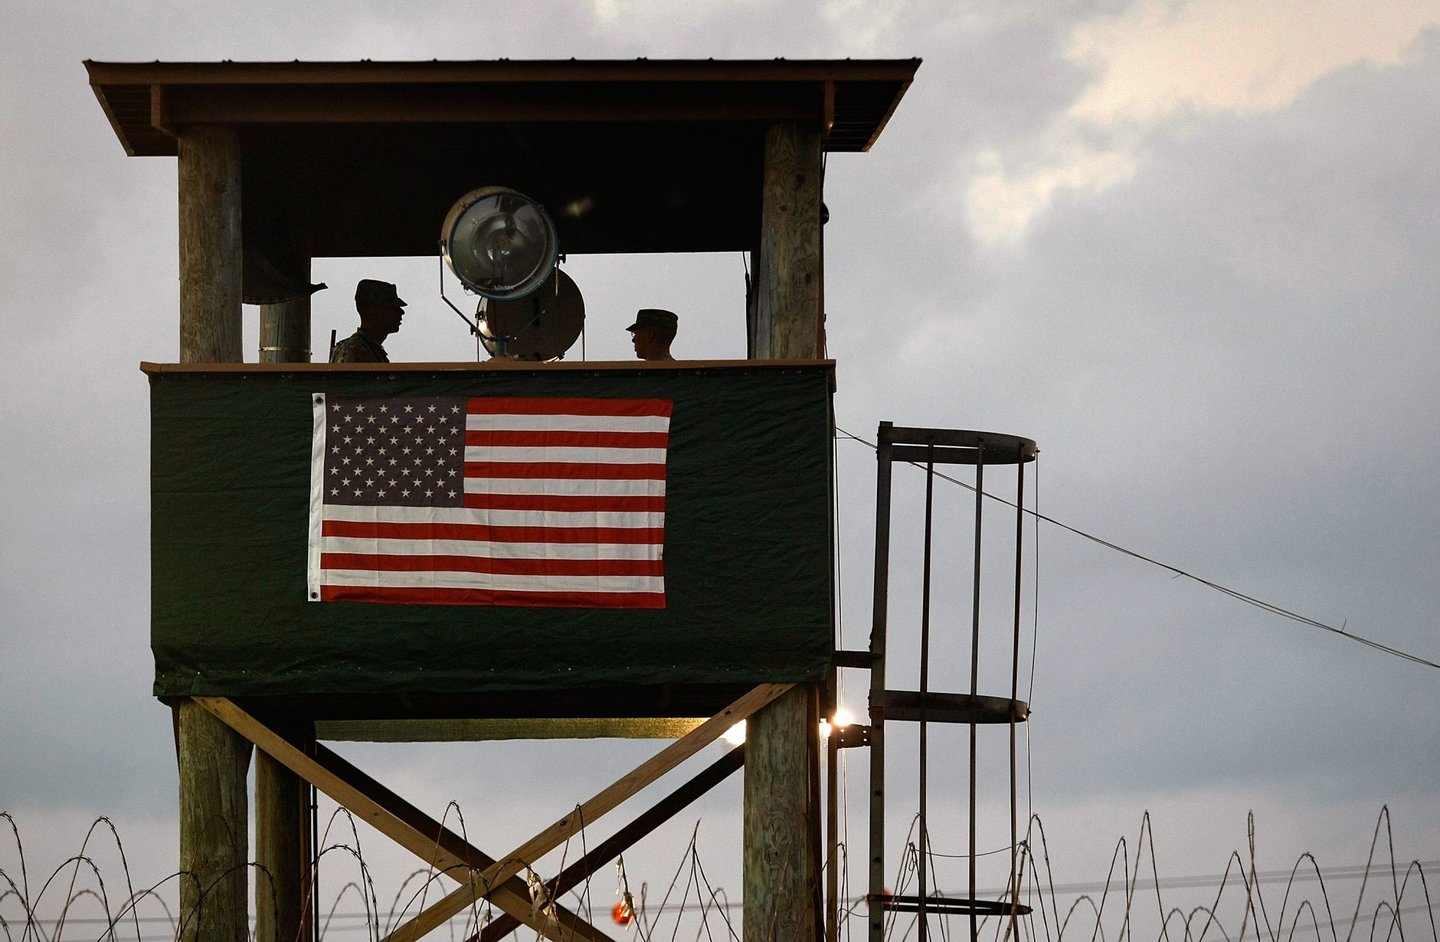 GUANTANAMO BAY, CUBA - MARCH 30: (EDITORS NOTE: Image has been reviewed by the U.S. Military prior to transmission.) U.S. Army soldiers stand watch in a guard tower at Camp Delta in the Guantanamo Bay detention center on March 30, 2010 in Guantanamo Bay, Cuba. U.S. President Barack Obama pledged to close the prison by early 2010 but has struggled to transfer, try or release the remaining detainees from the facility, located on the U.S. Naval Base at Guantanamo Bay, Cuba. (Photo by John Moore/Getty Images)